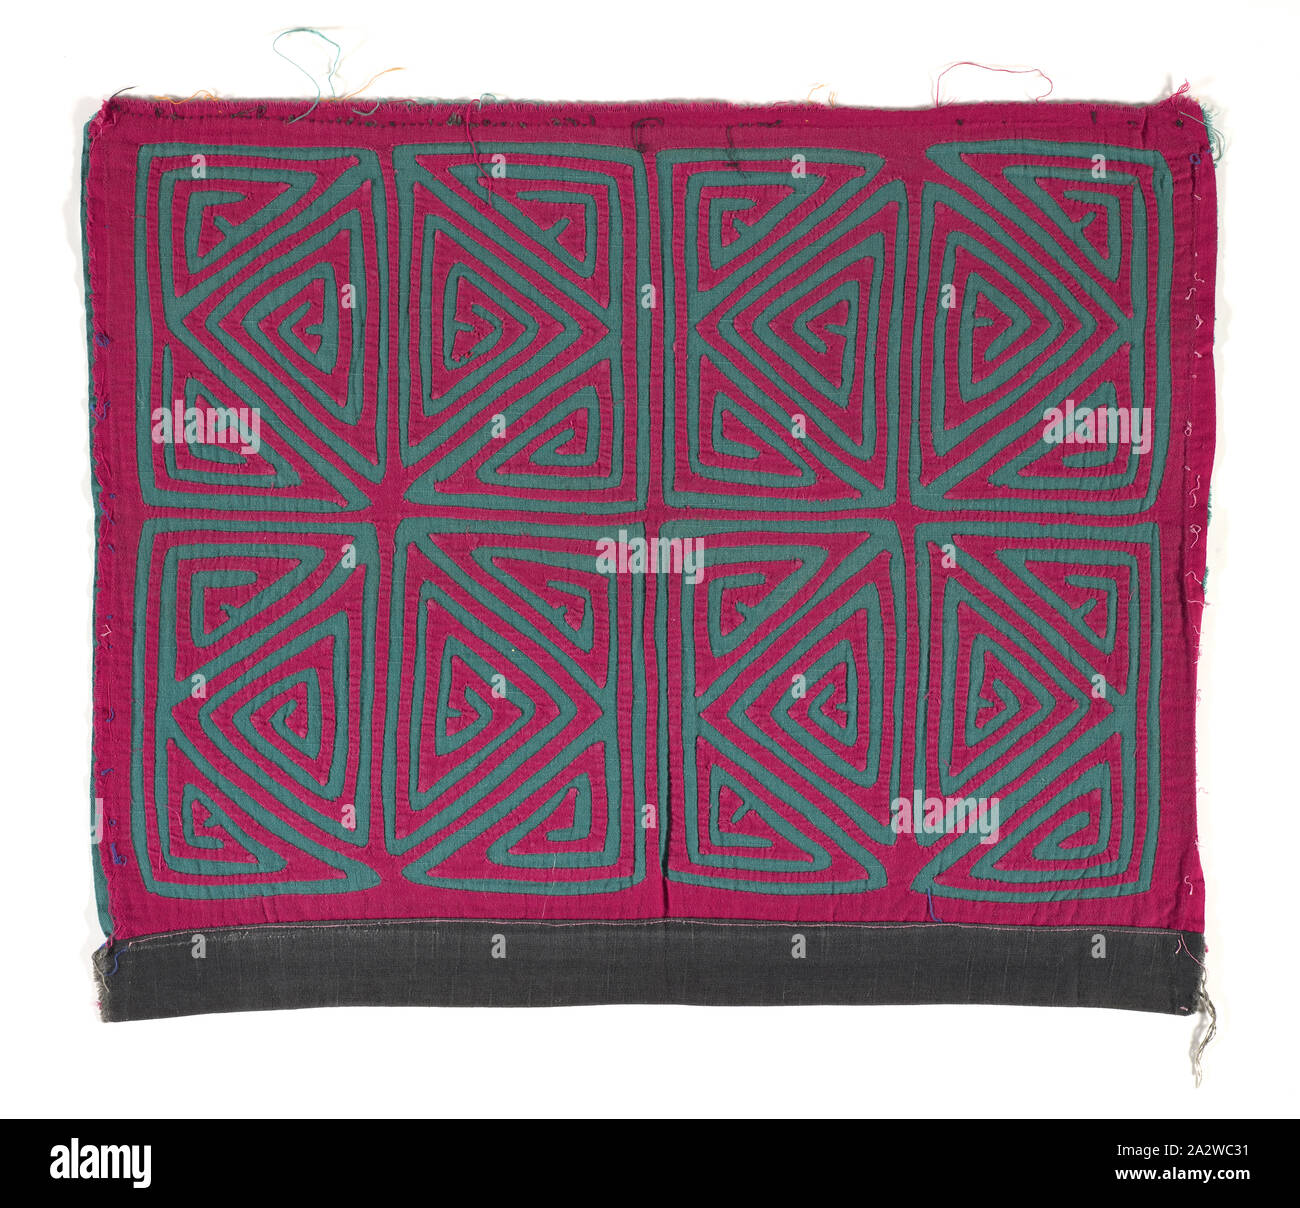 shirt panel (mola), Kuna people, about 1950s, appliqued cotton, 16-7/8 x 20-3/4 in., Textile and Fashion Arts Stock Photo